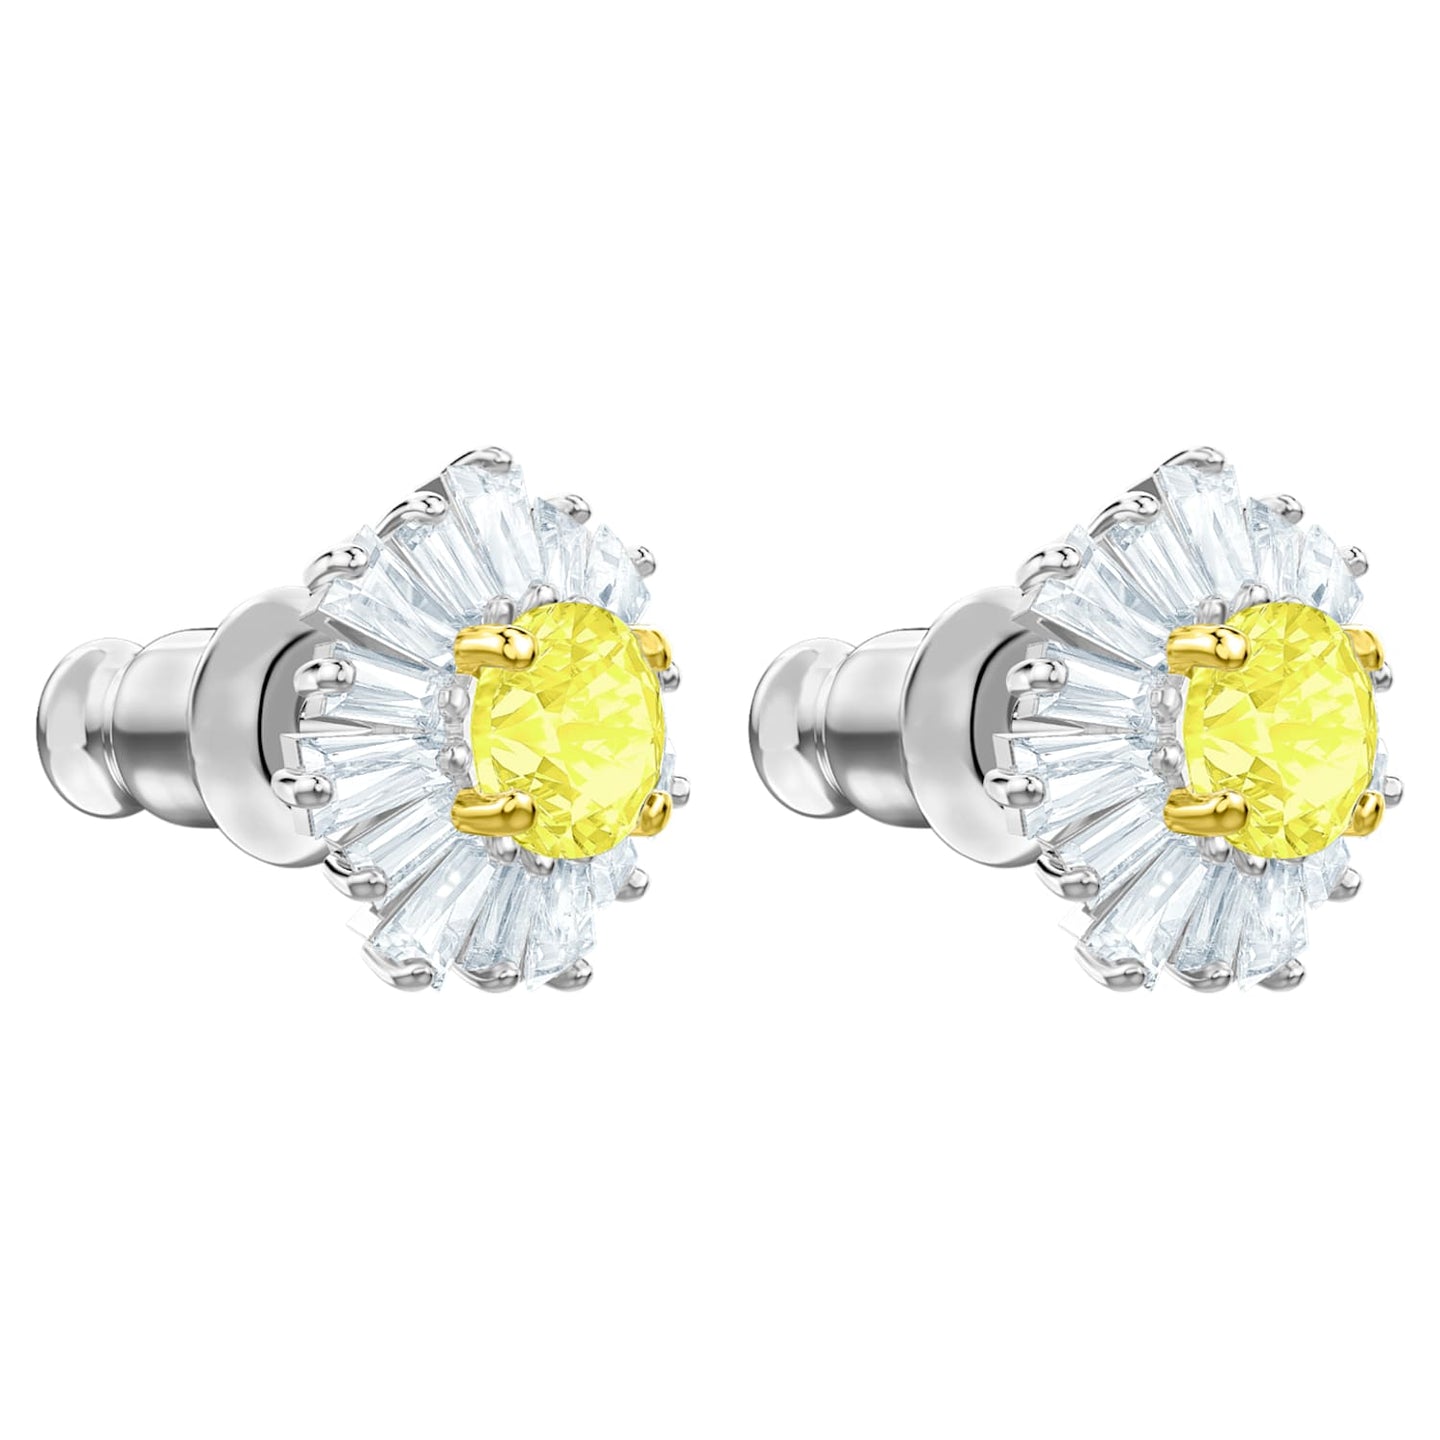 Look back Creature Thaw, thaw, frost thaw SWAROVSKI Sunshine Pierced Earrings, White, Rhodium plated 5459591 – Lotte  Duty Free Guam Pay and Pick-Up Point Shopping Service